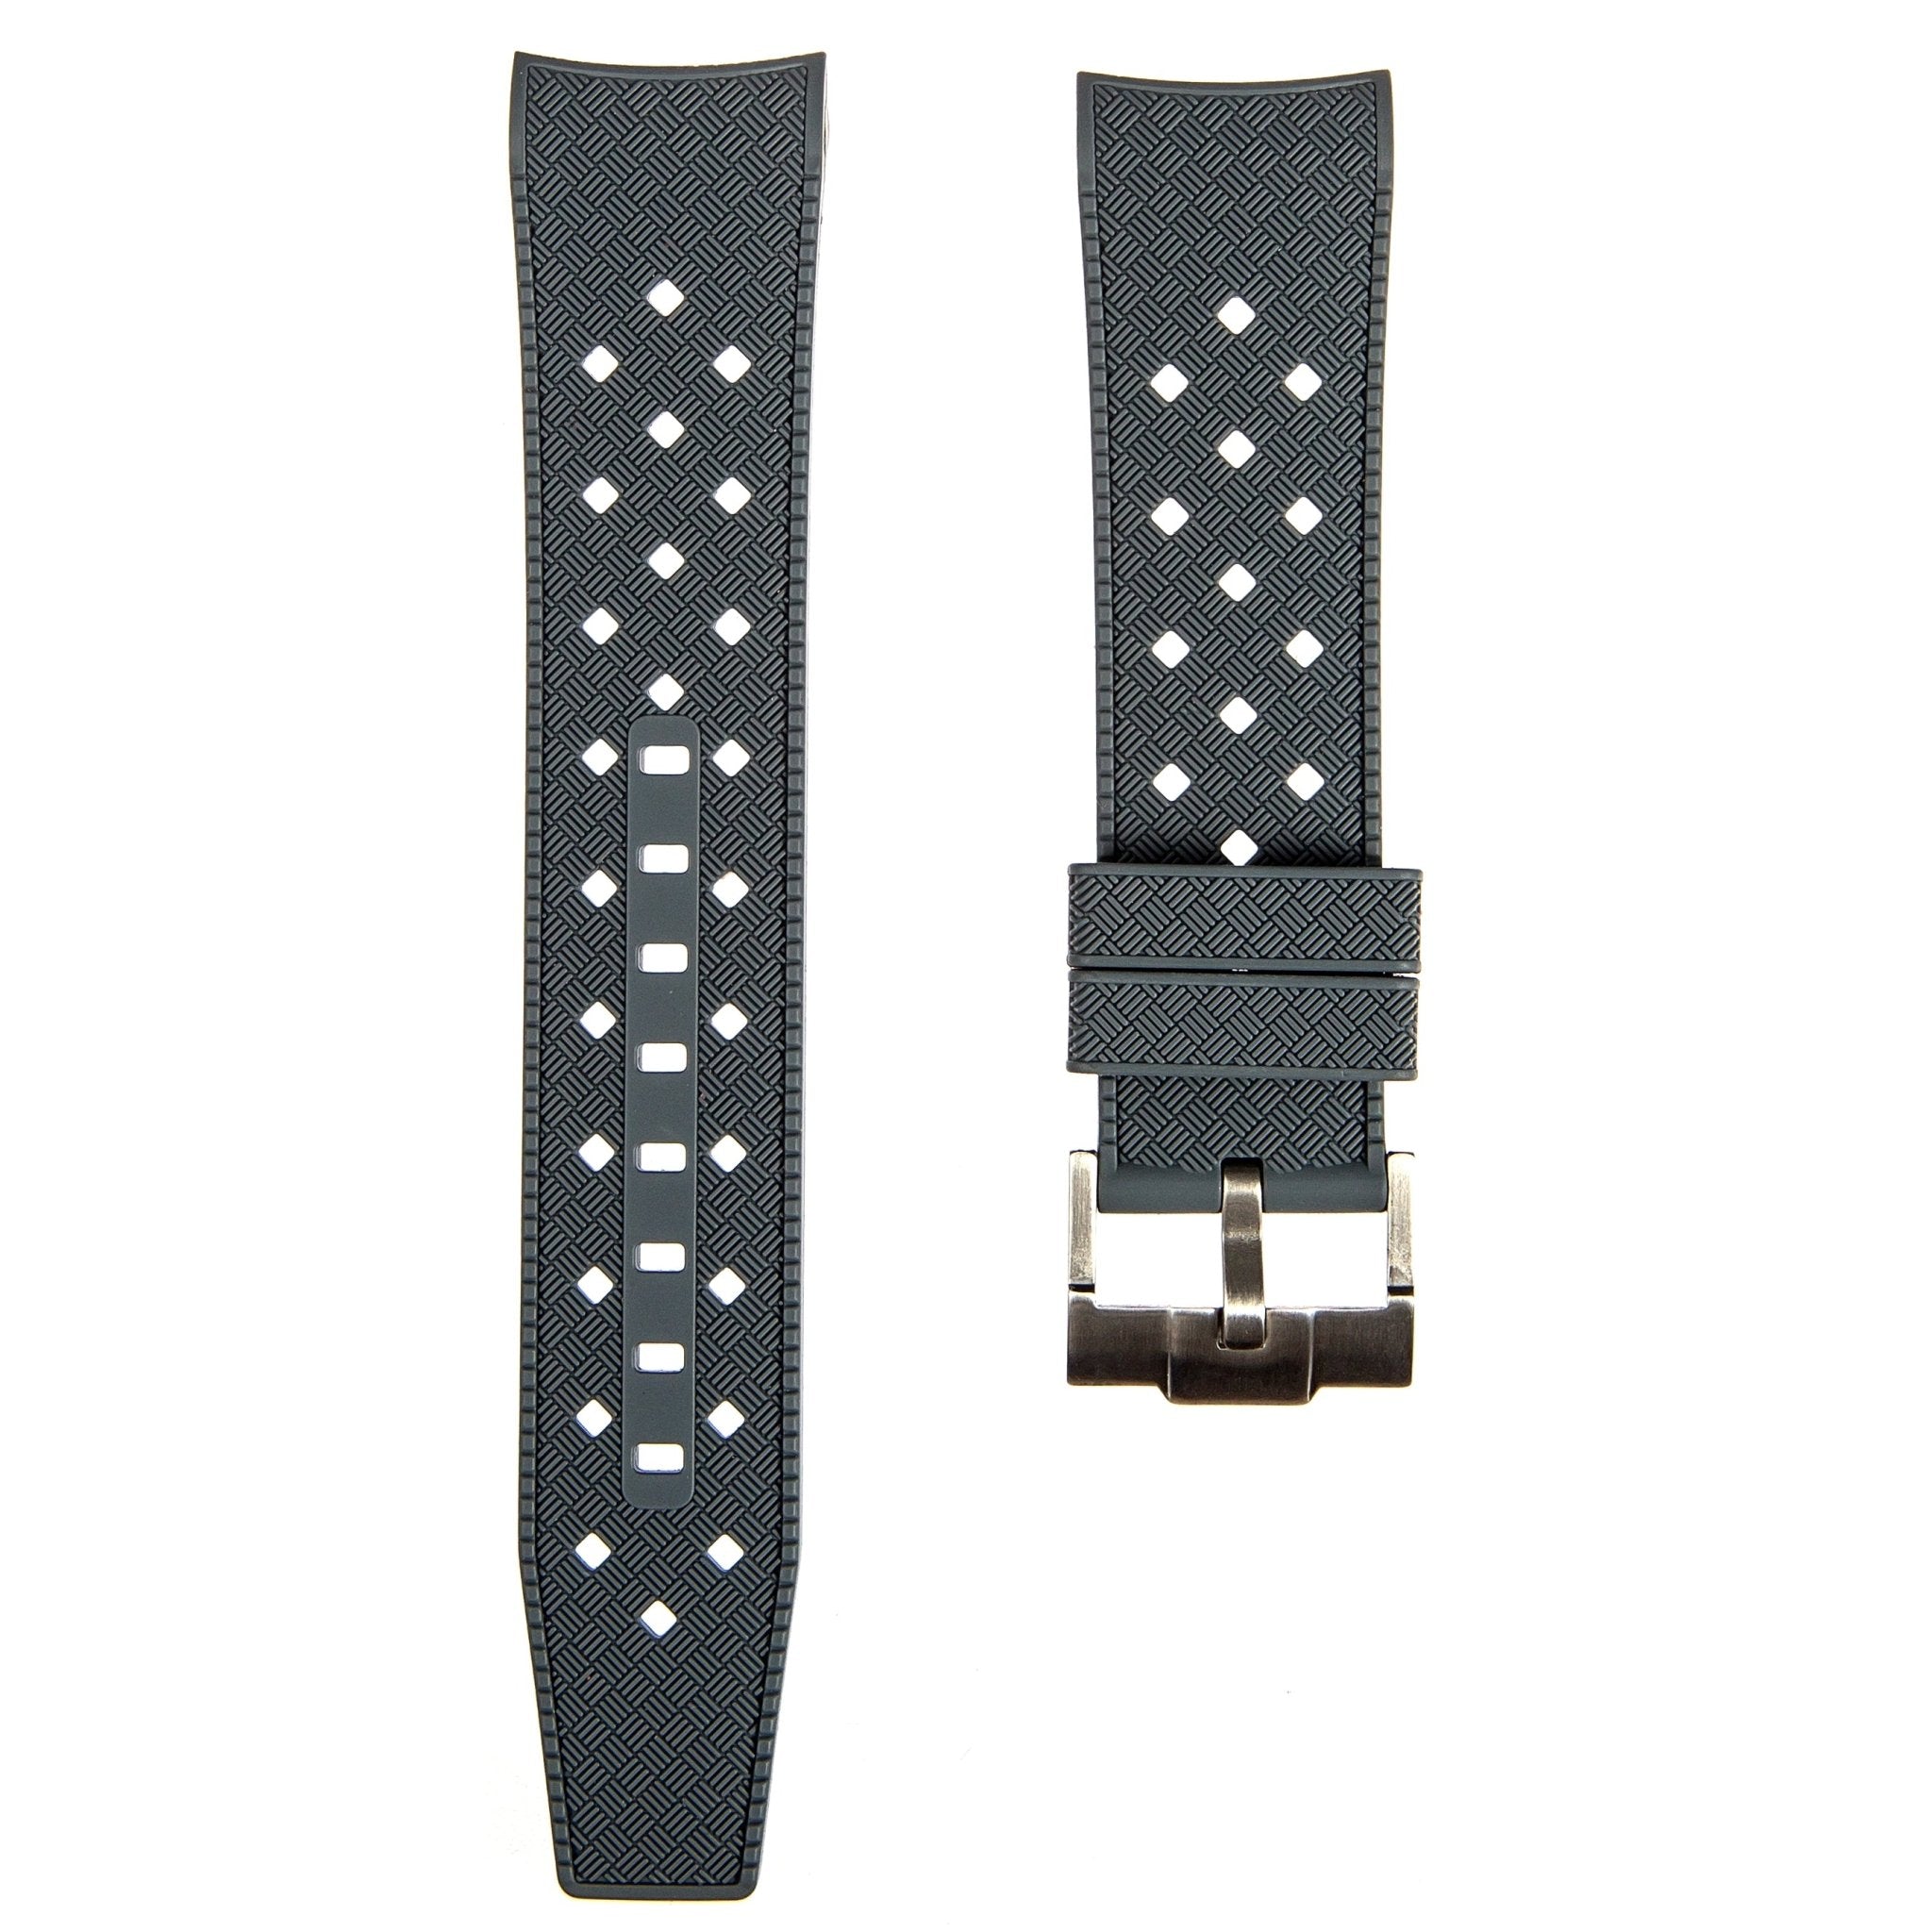 Vintage Tropical Curved End Premium Silicone Strap - Compatible with Blancpain x Swatch - Dark Grey (2415) -StrapSeeker